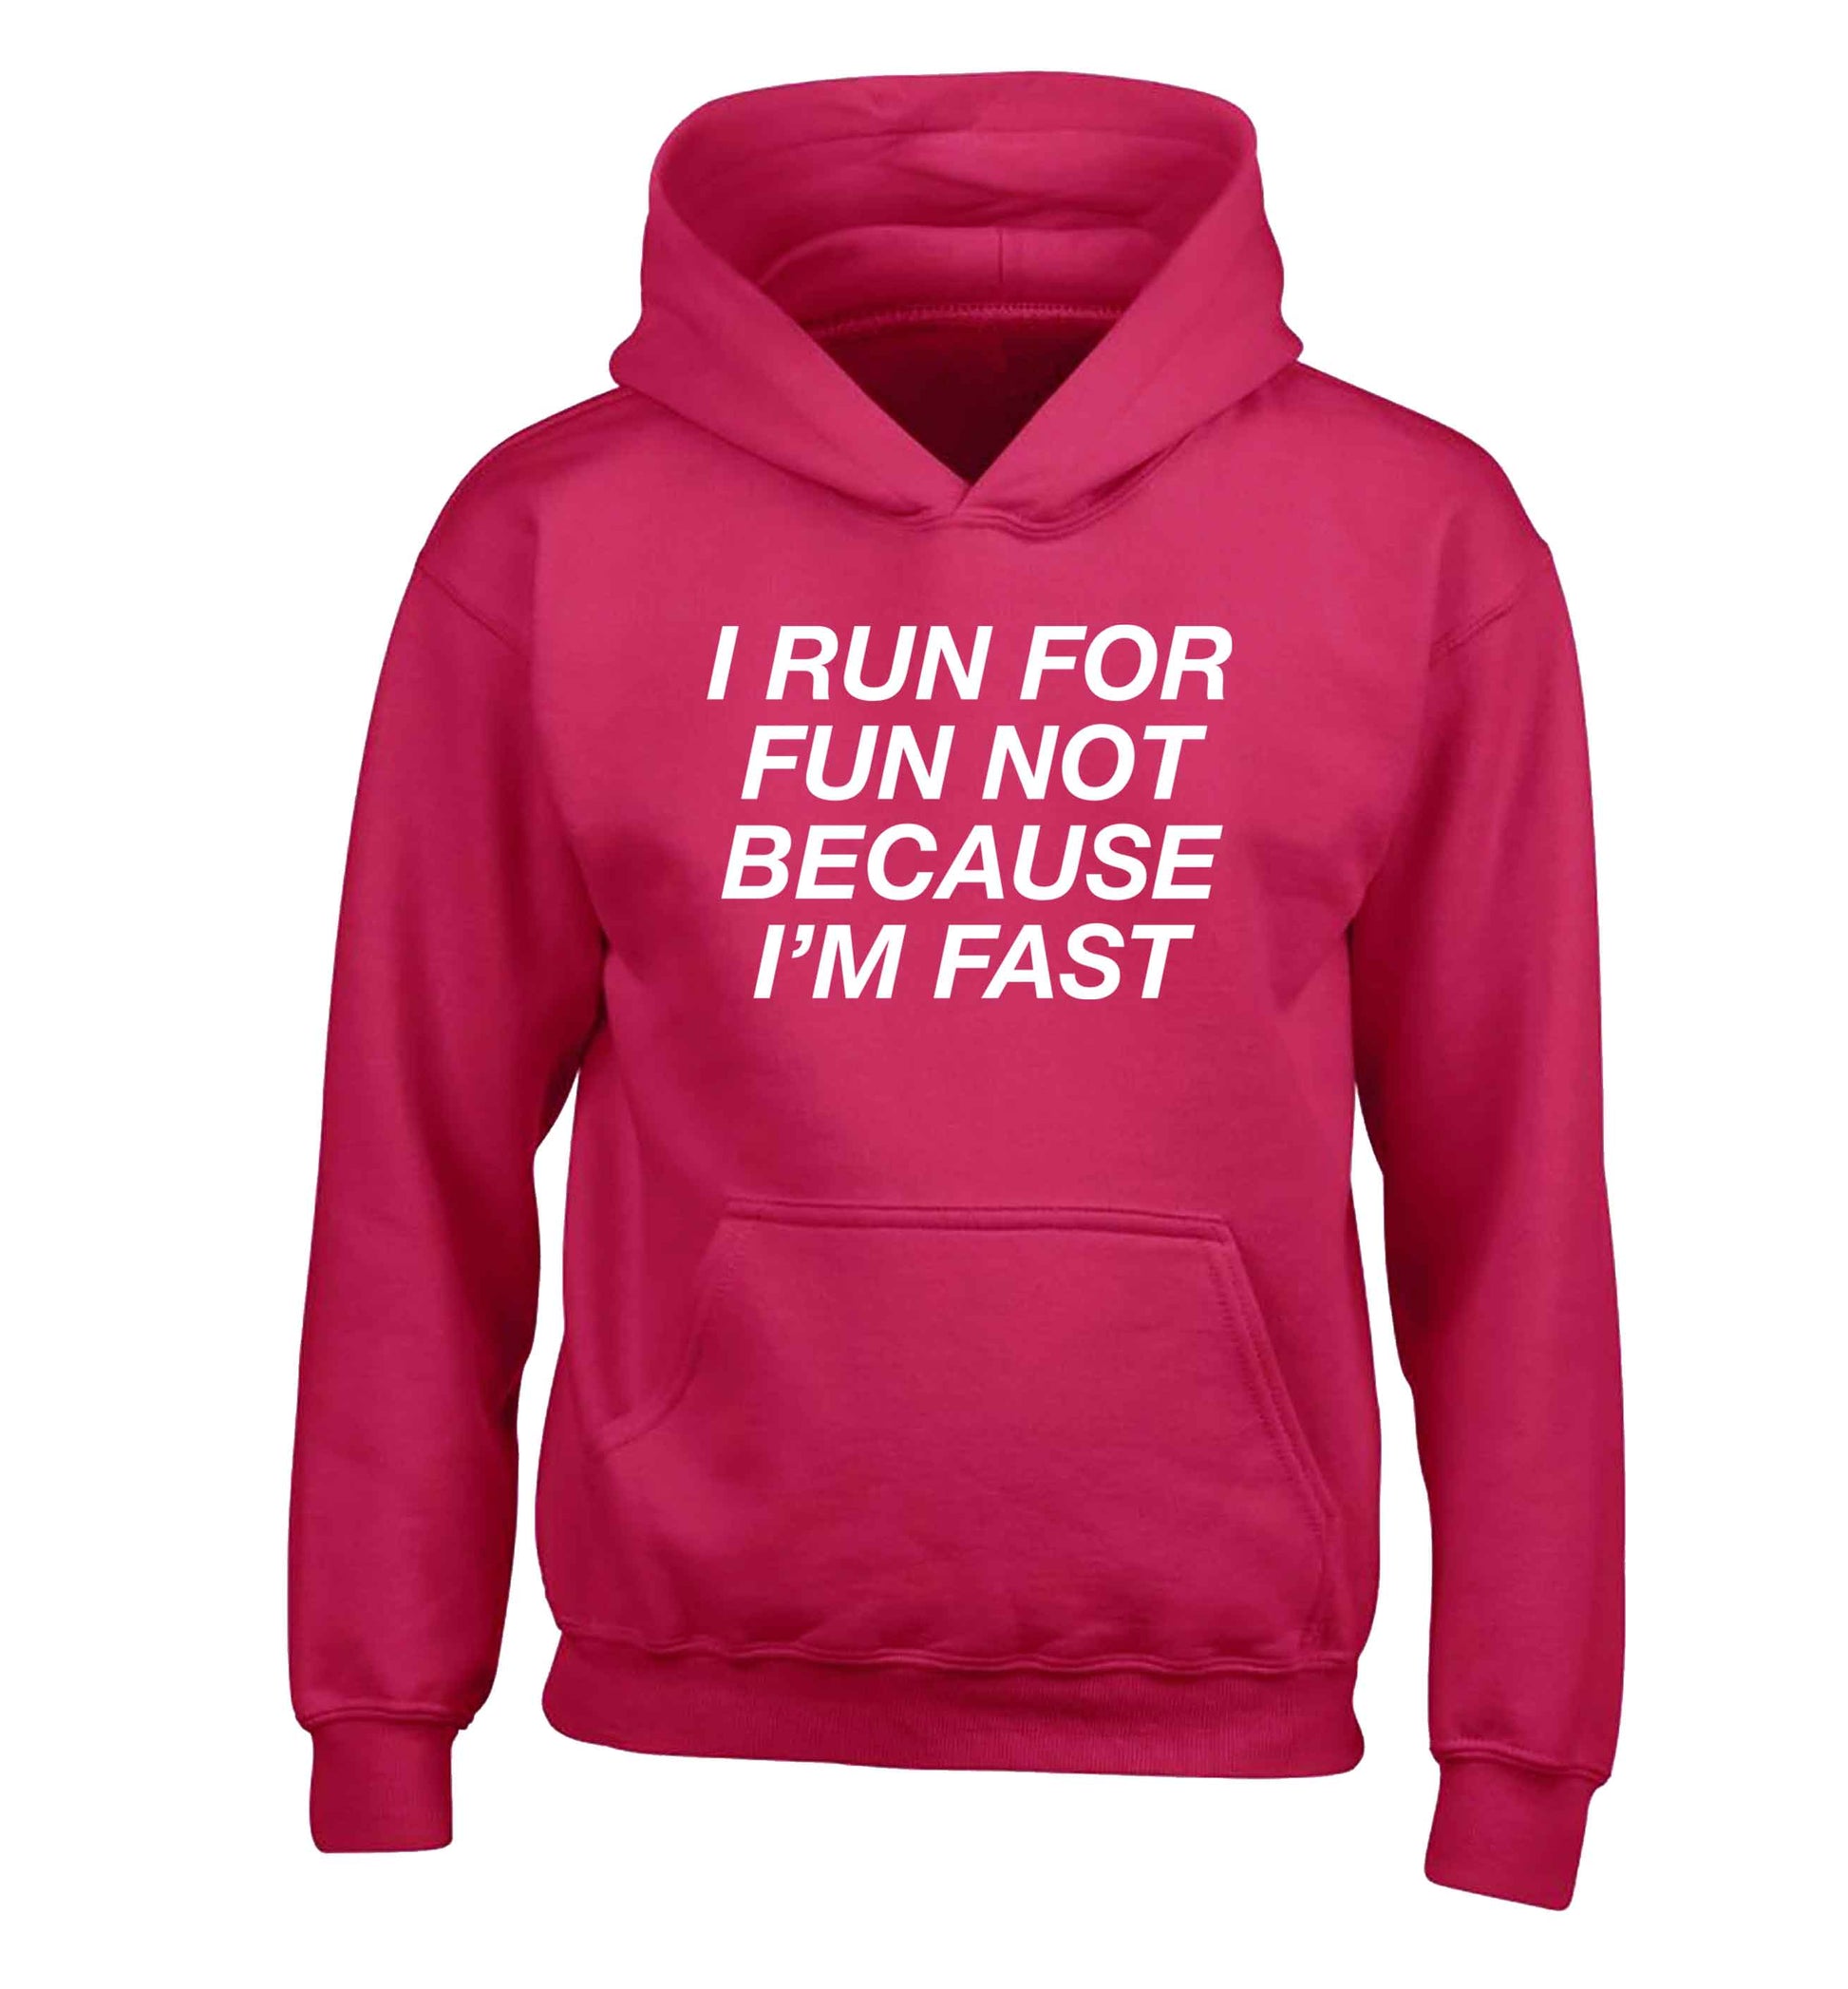 I run for fun not because I'm fast children's pink hoodie 12-13 Years